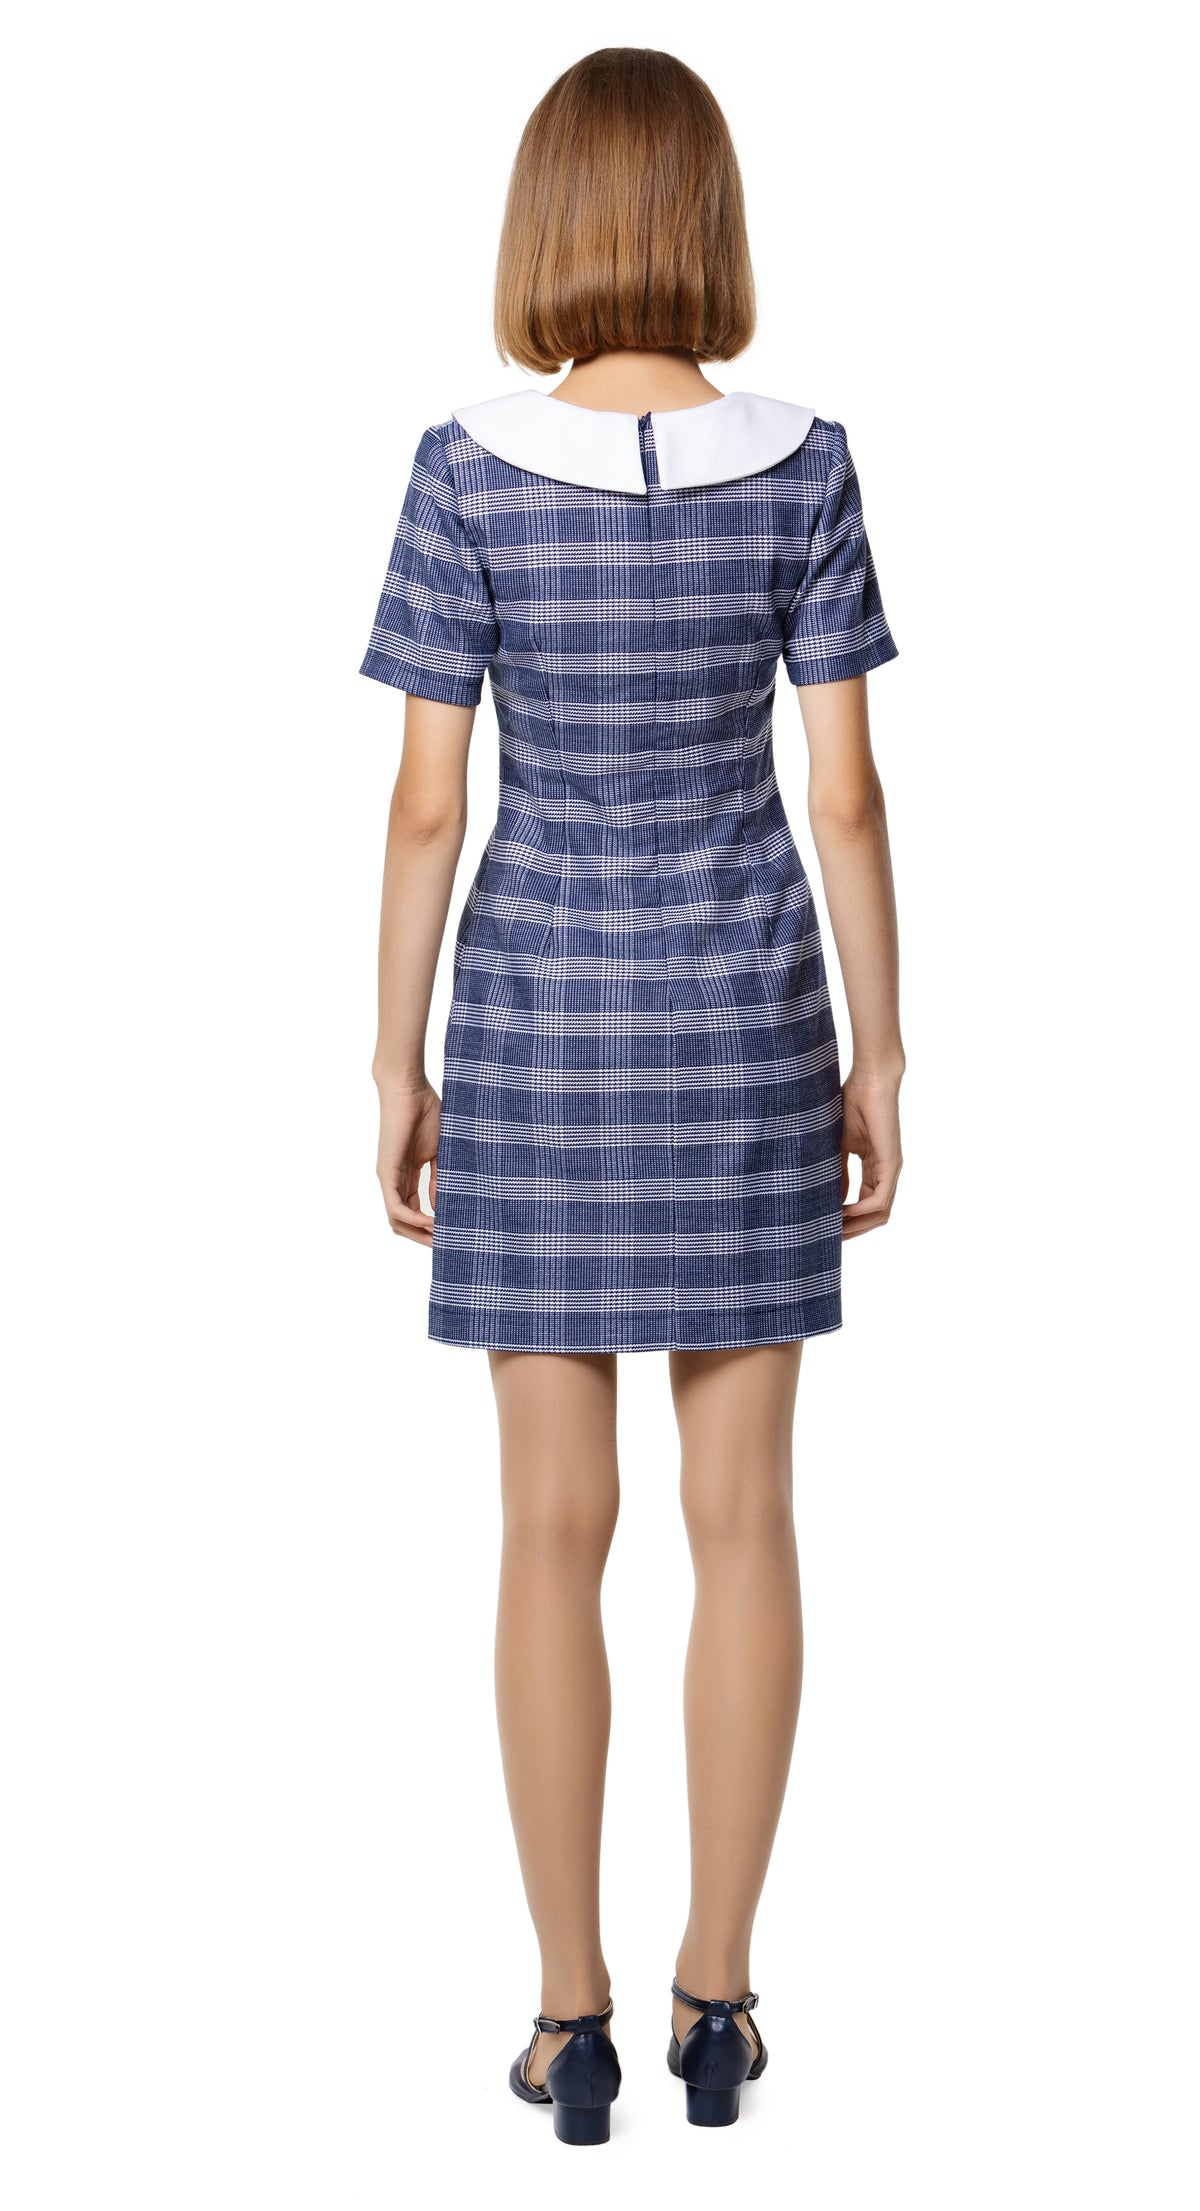 Sixties plaid uniform a-line dress with nautical style collar and detachable white decorative tie. An effortlessly impacting style from office to after hours.   Choose bespoke for made to measure sizing and customization. 